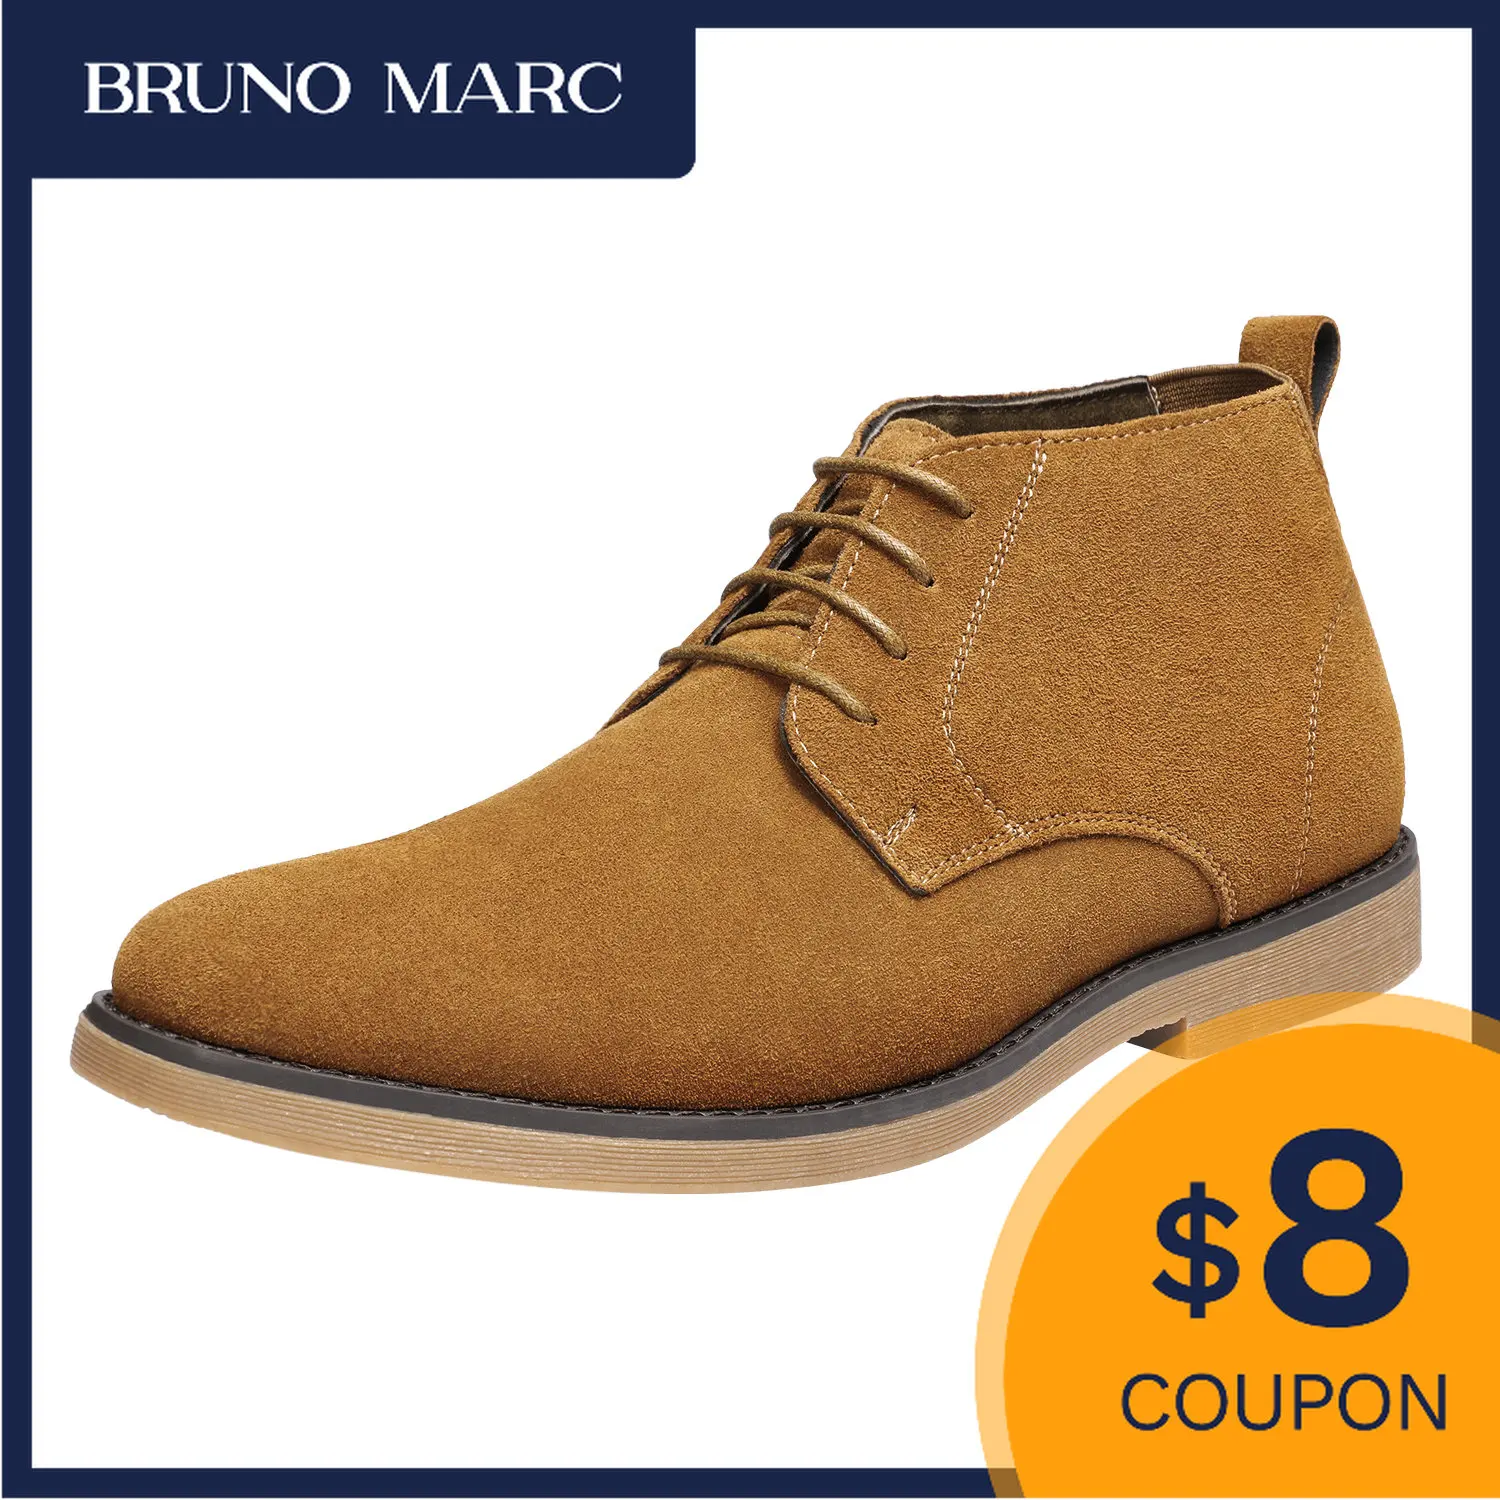 

Bruno Marc Mens Retro Ankle Boots Suede Leather High-Top Tooling Autumn Business Brown Shoes Desert Fashion Martin Boots for Men